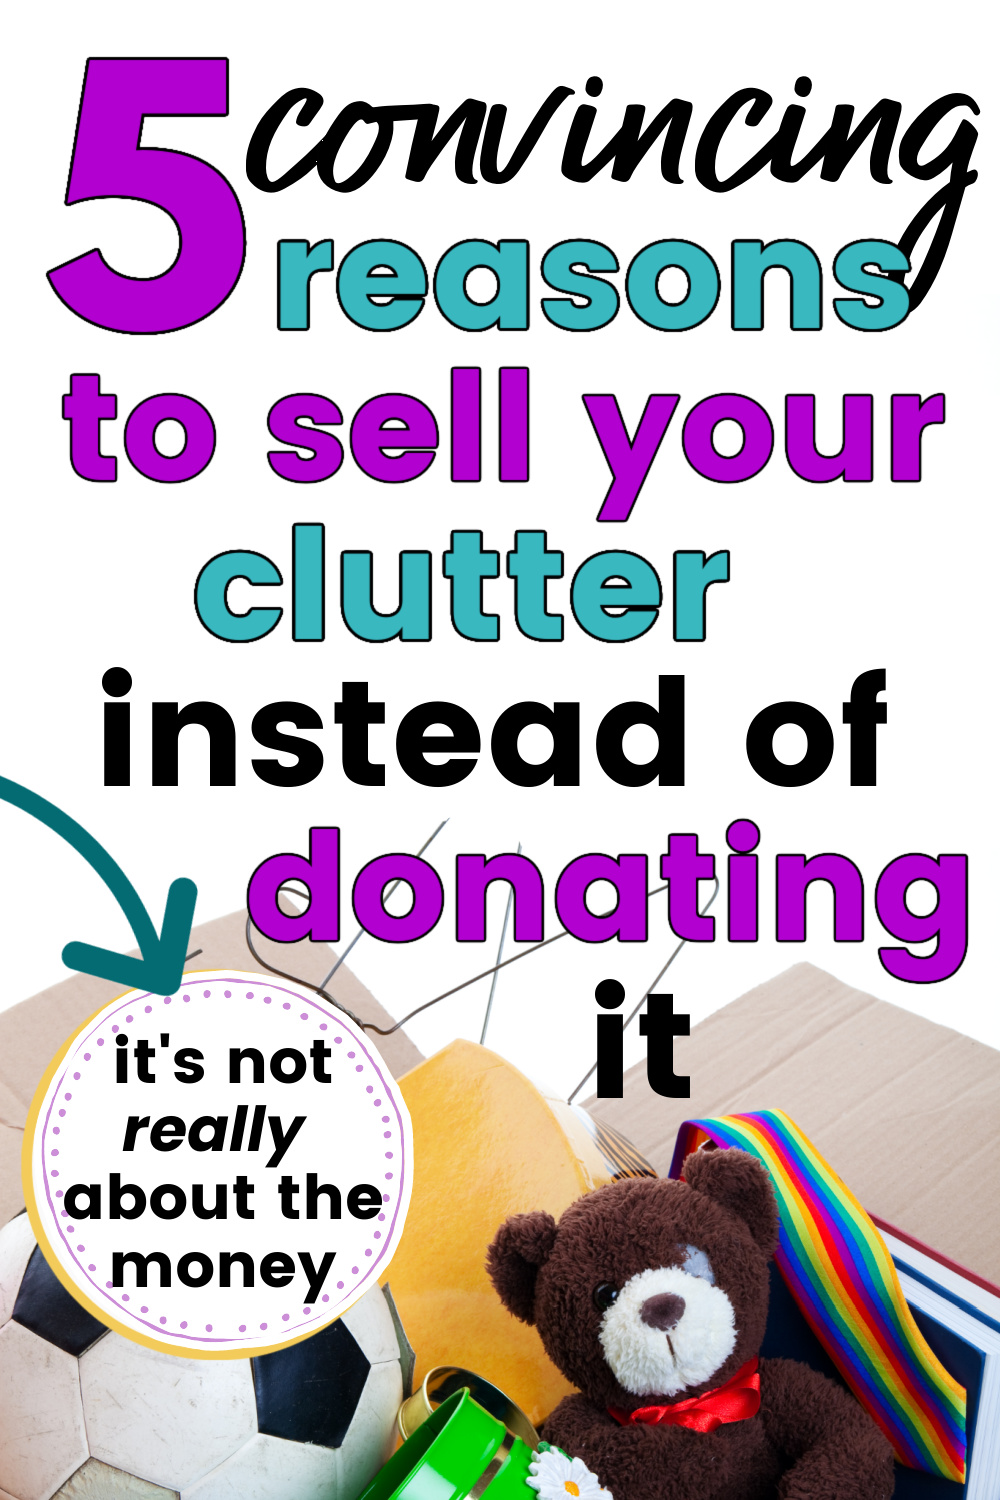 cardboard box filled with decluttered toys including stuffed animal, with text overlay, "5 convincing reasons to sell your clutter instead of donating it - it's not really about the money"